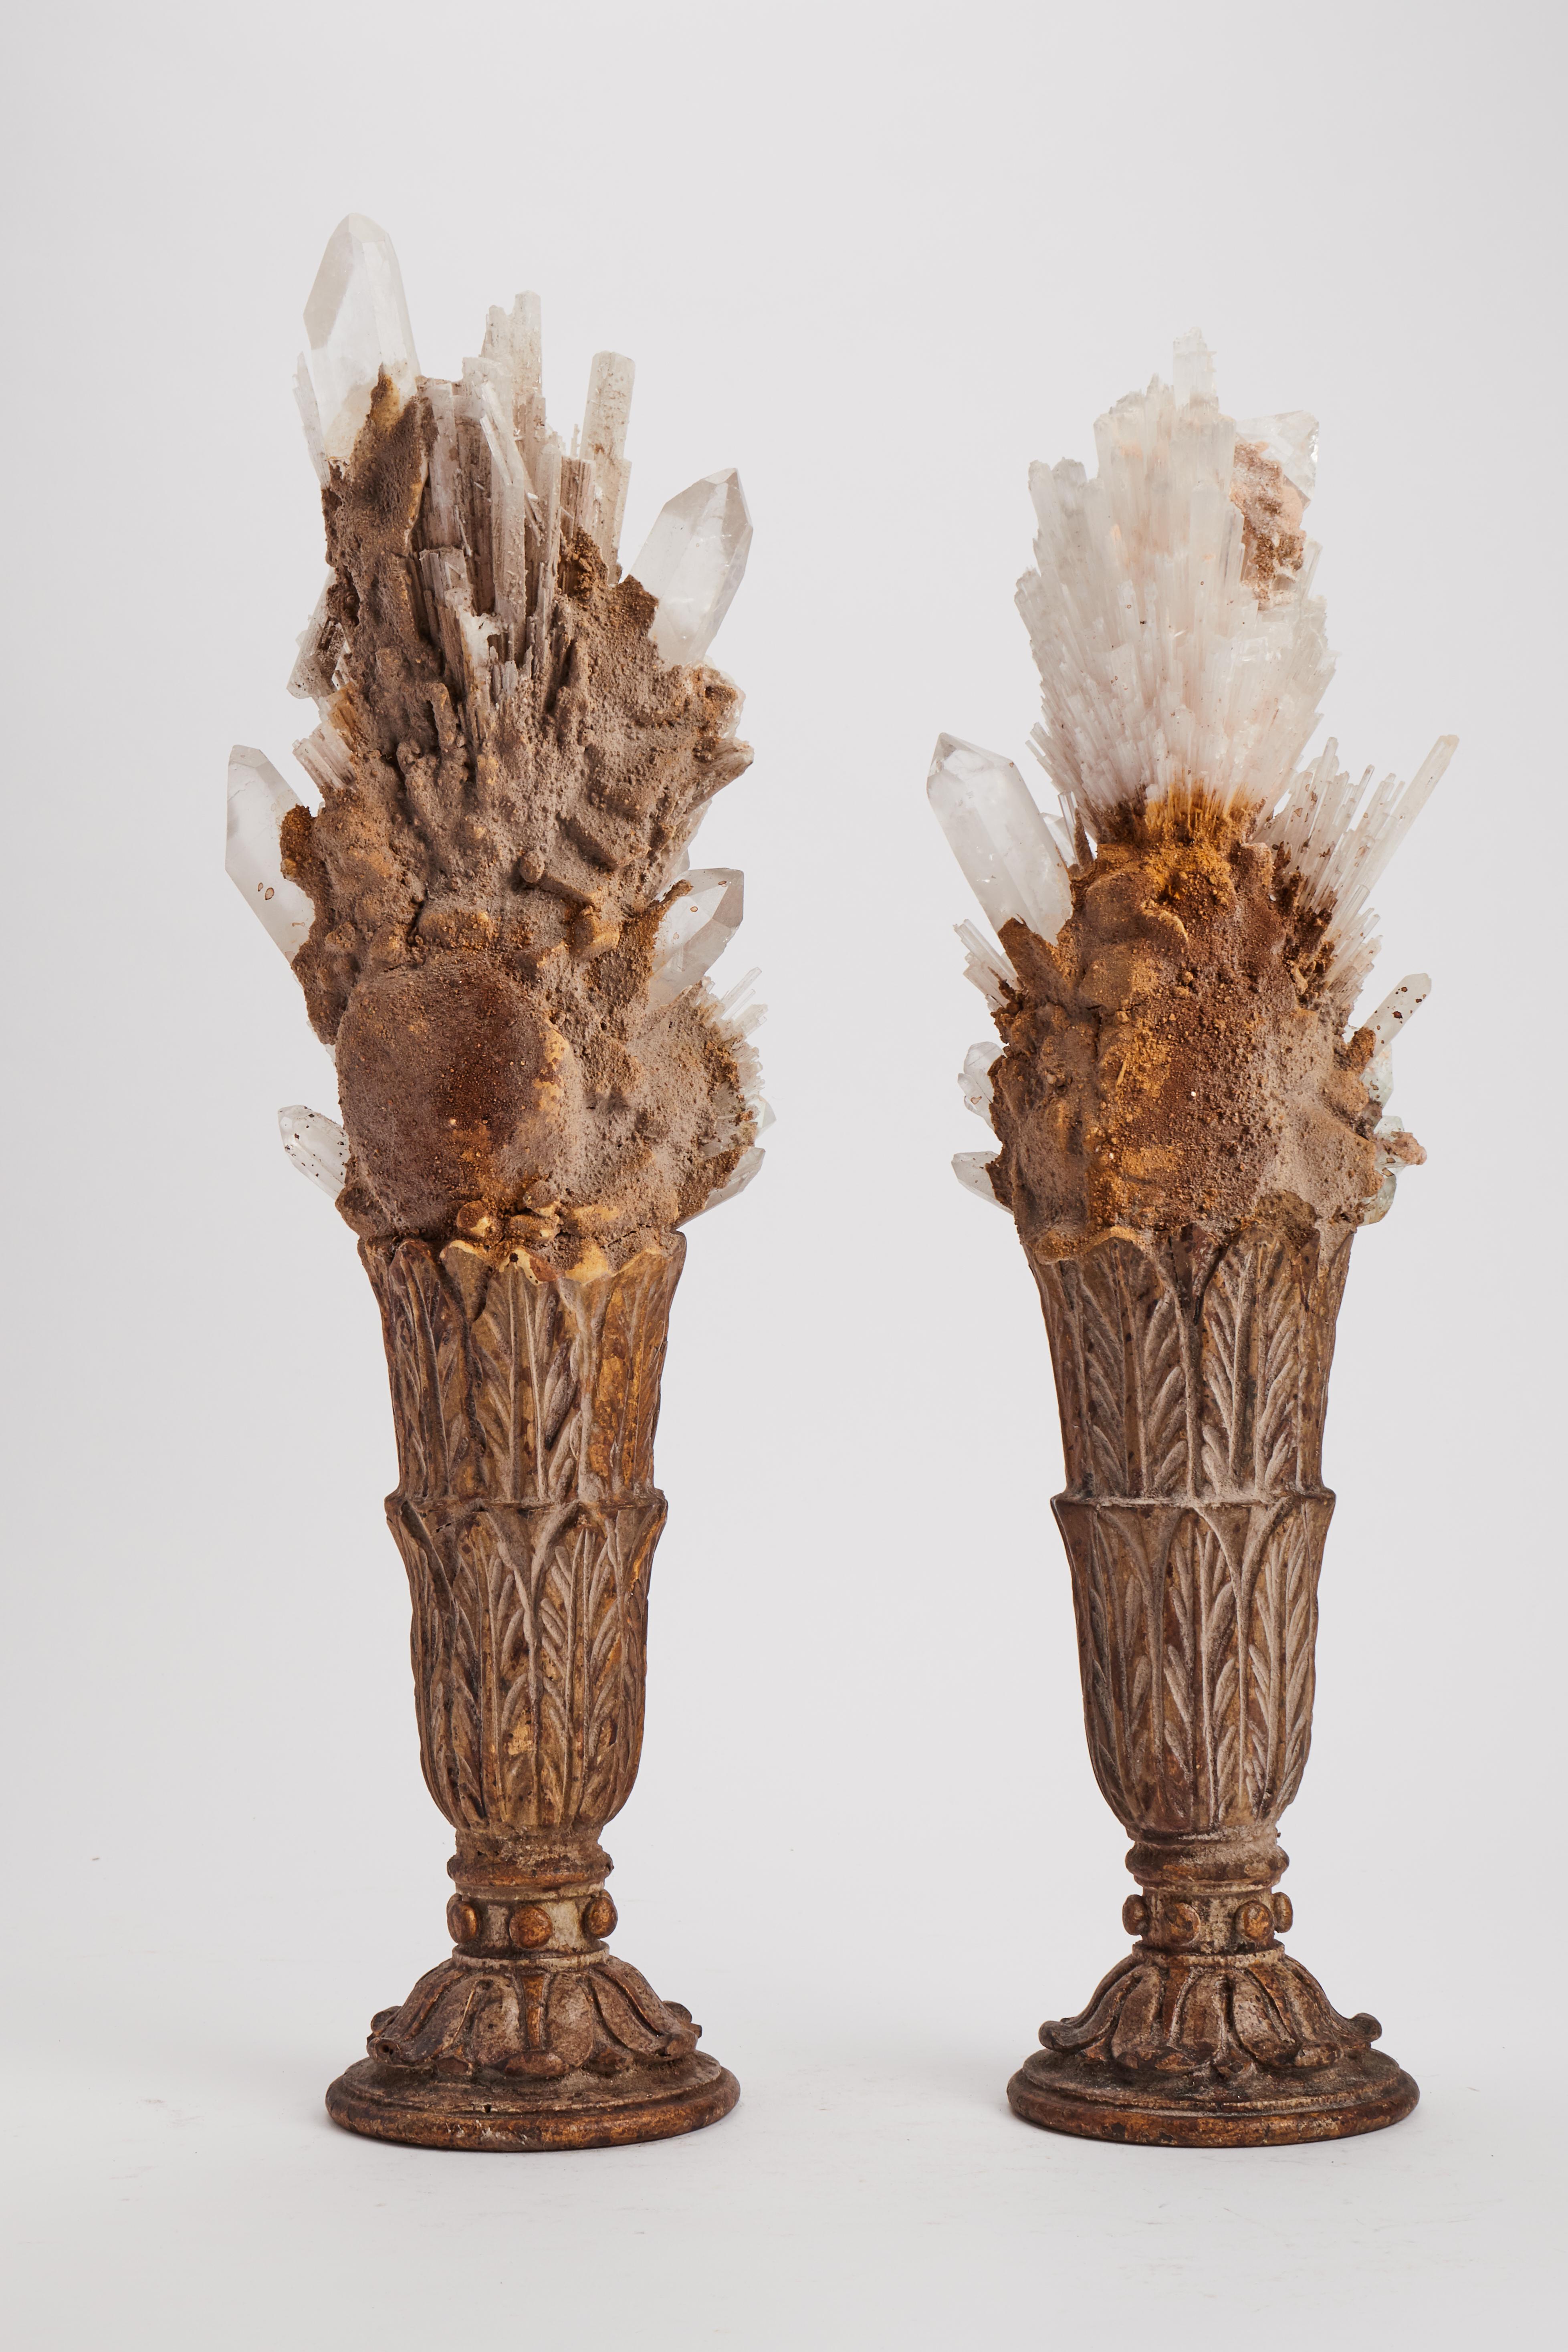 A Naturalia mineral specimen. A pair of compositions of Scolecite and Apophilite crystals, mounted over gold-plated wooden bases, shape of vase with carved leaves. Italy 1880 ca.